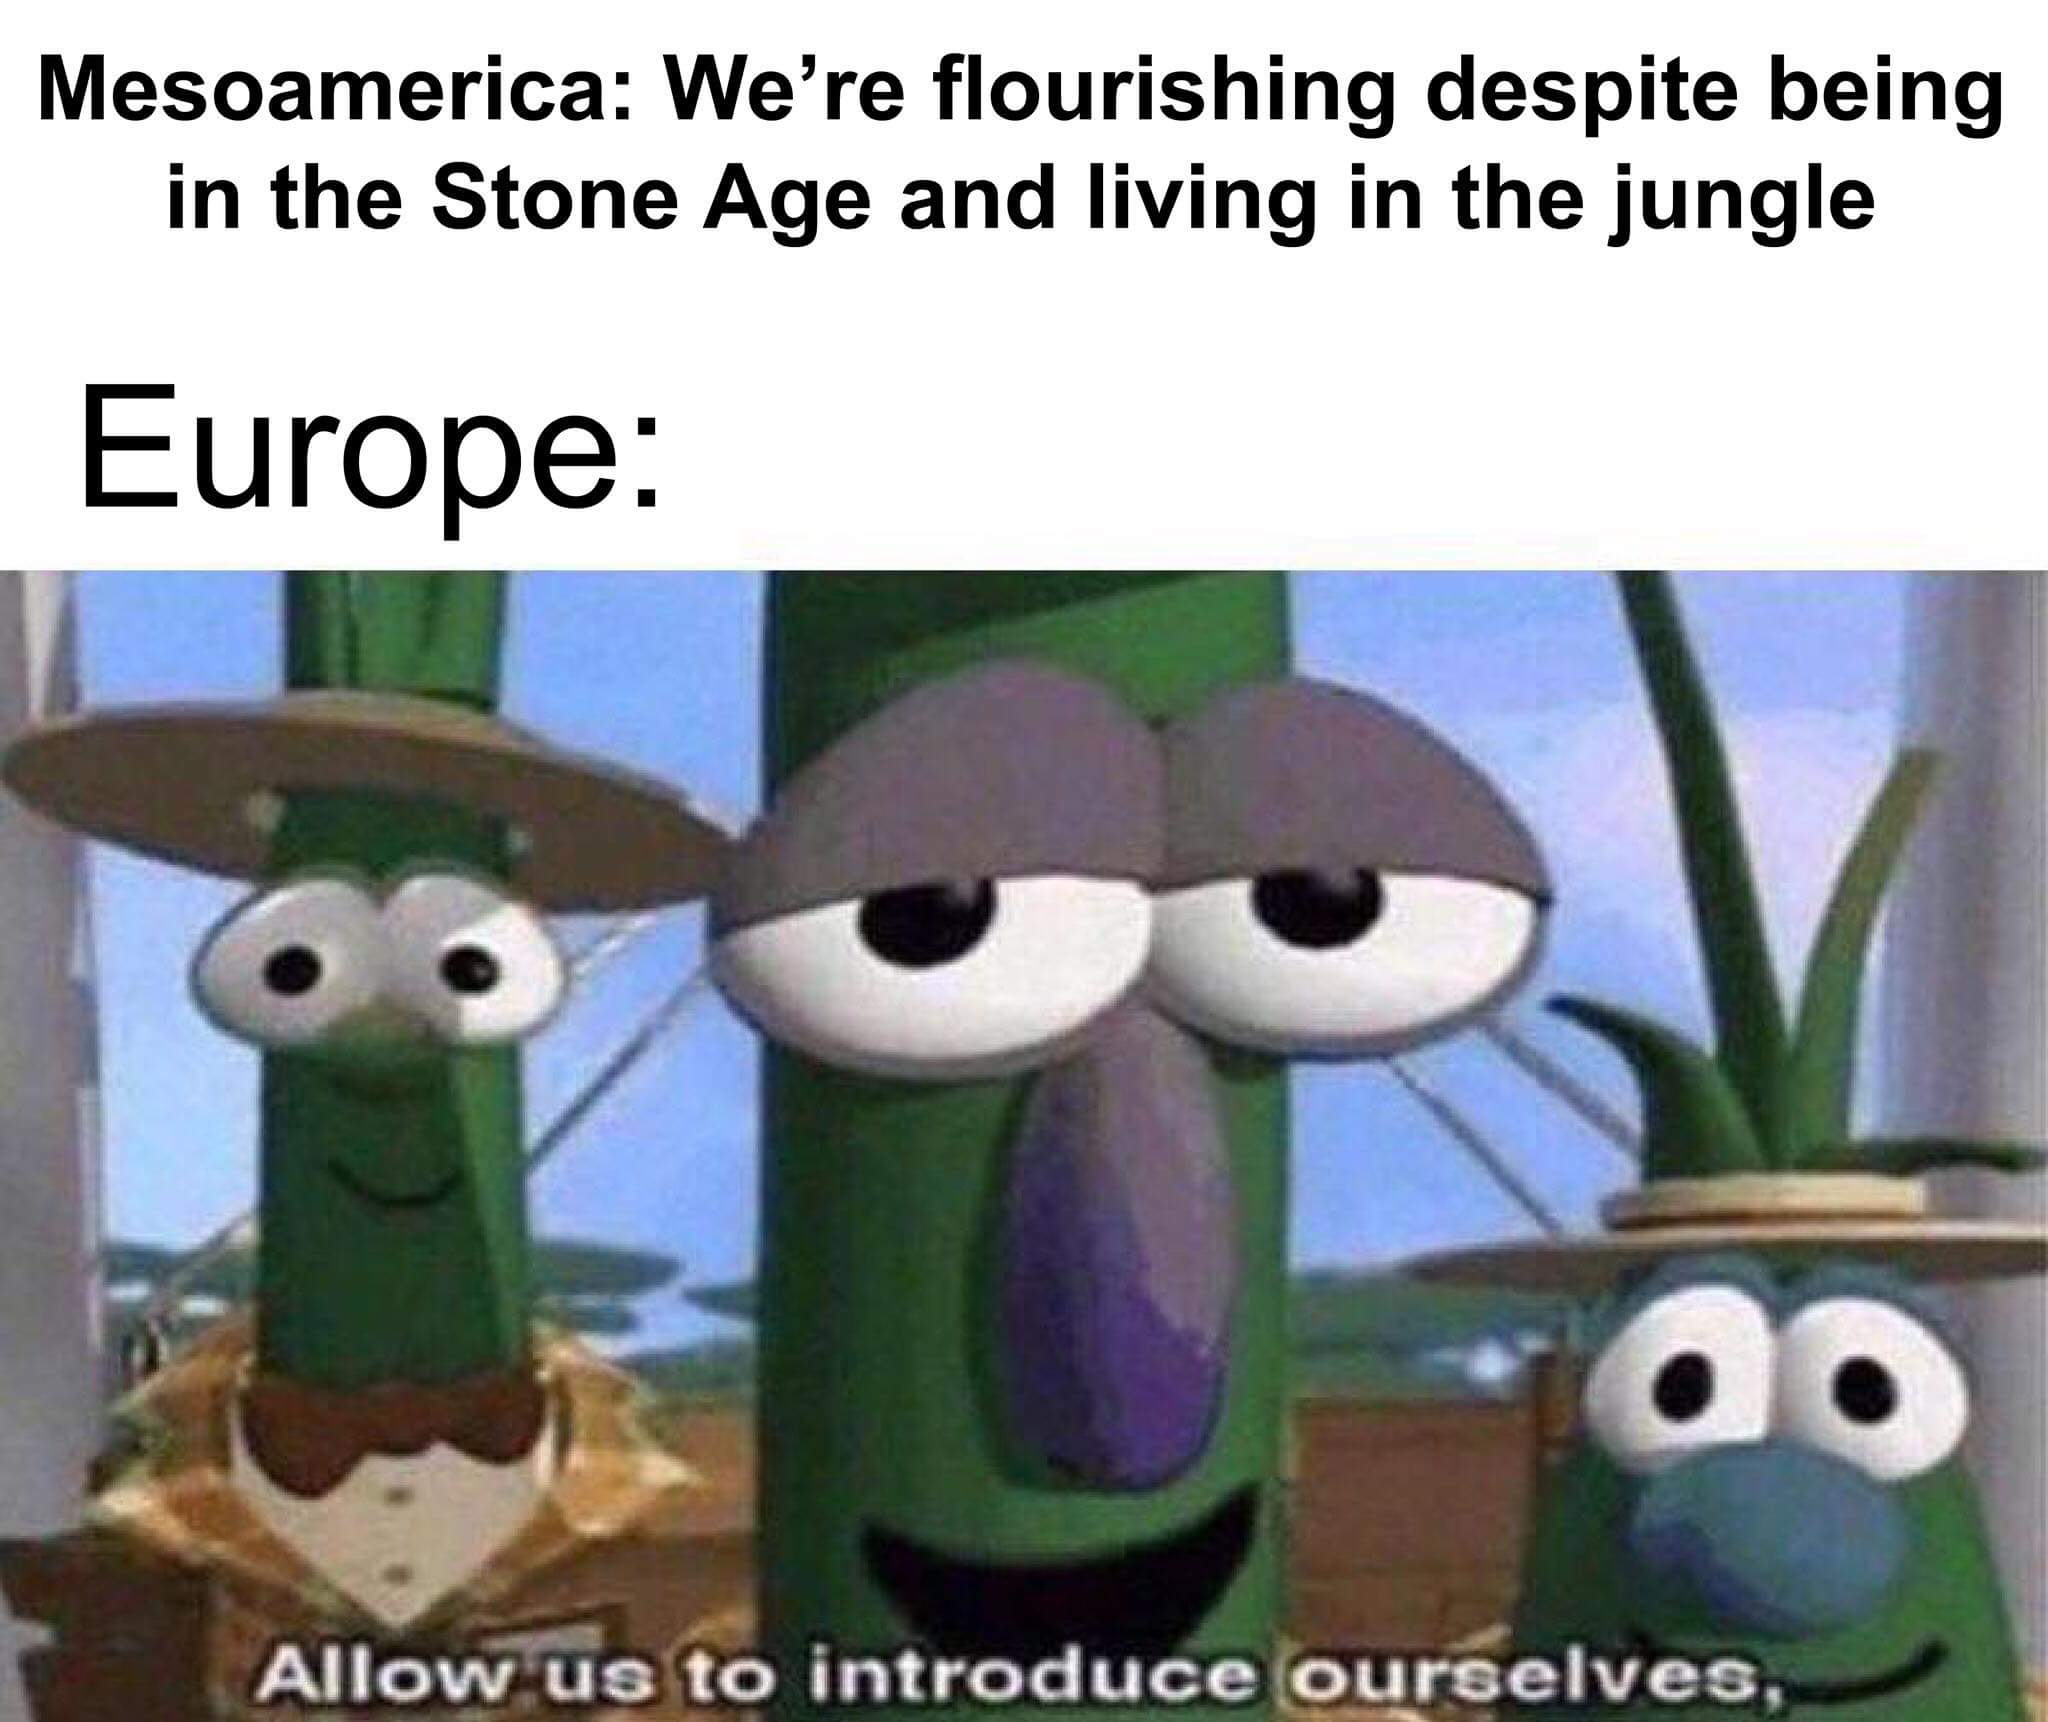 history meme - allow me to introduce myself meme - Mesoamerica We're flourishing despite being in the Stone Age and living in the jungle Europe Allow us to introduce ourselves,